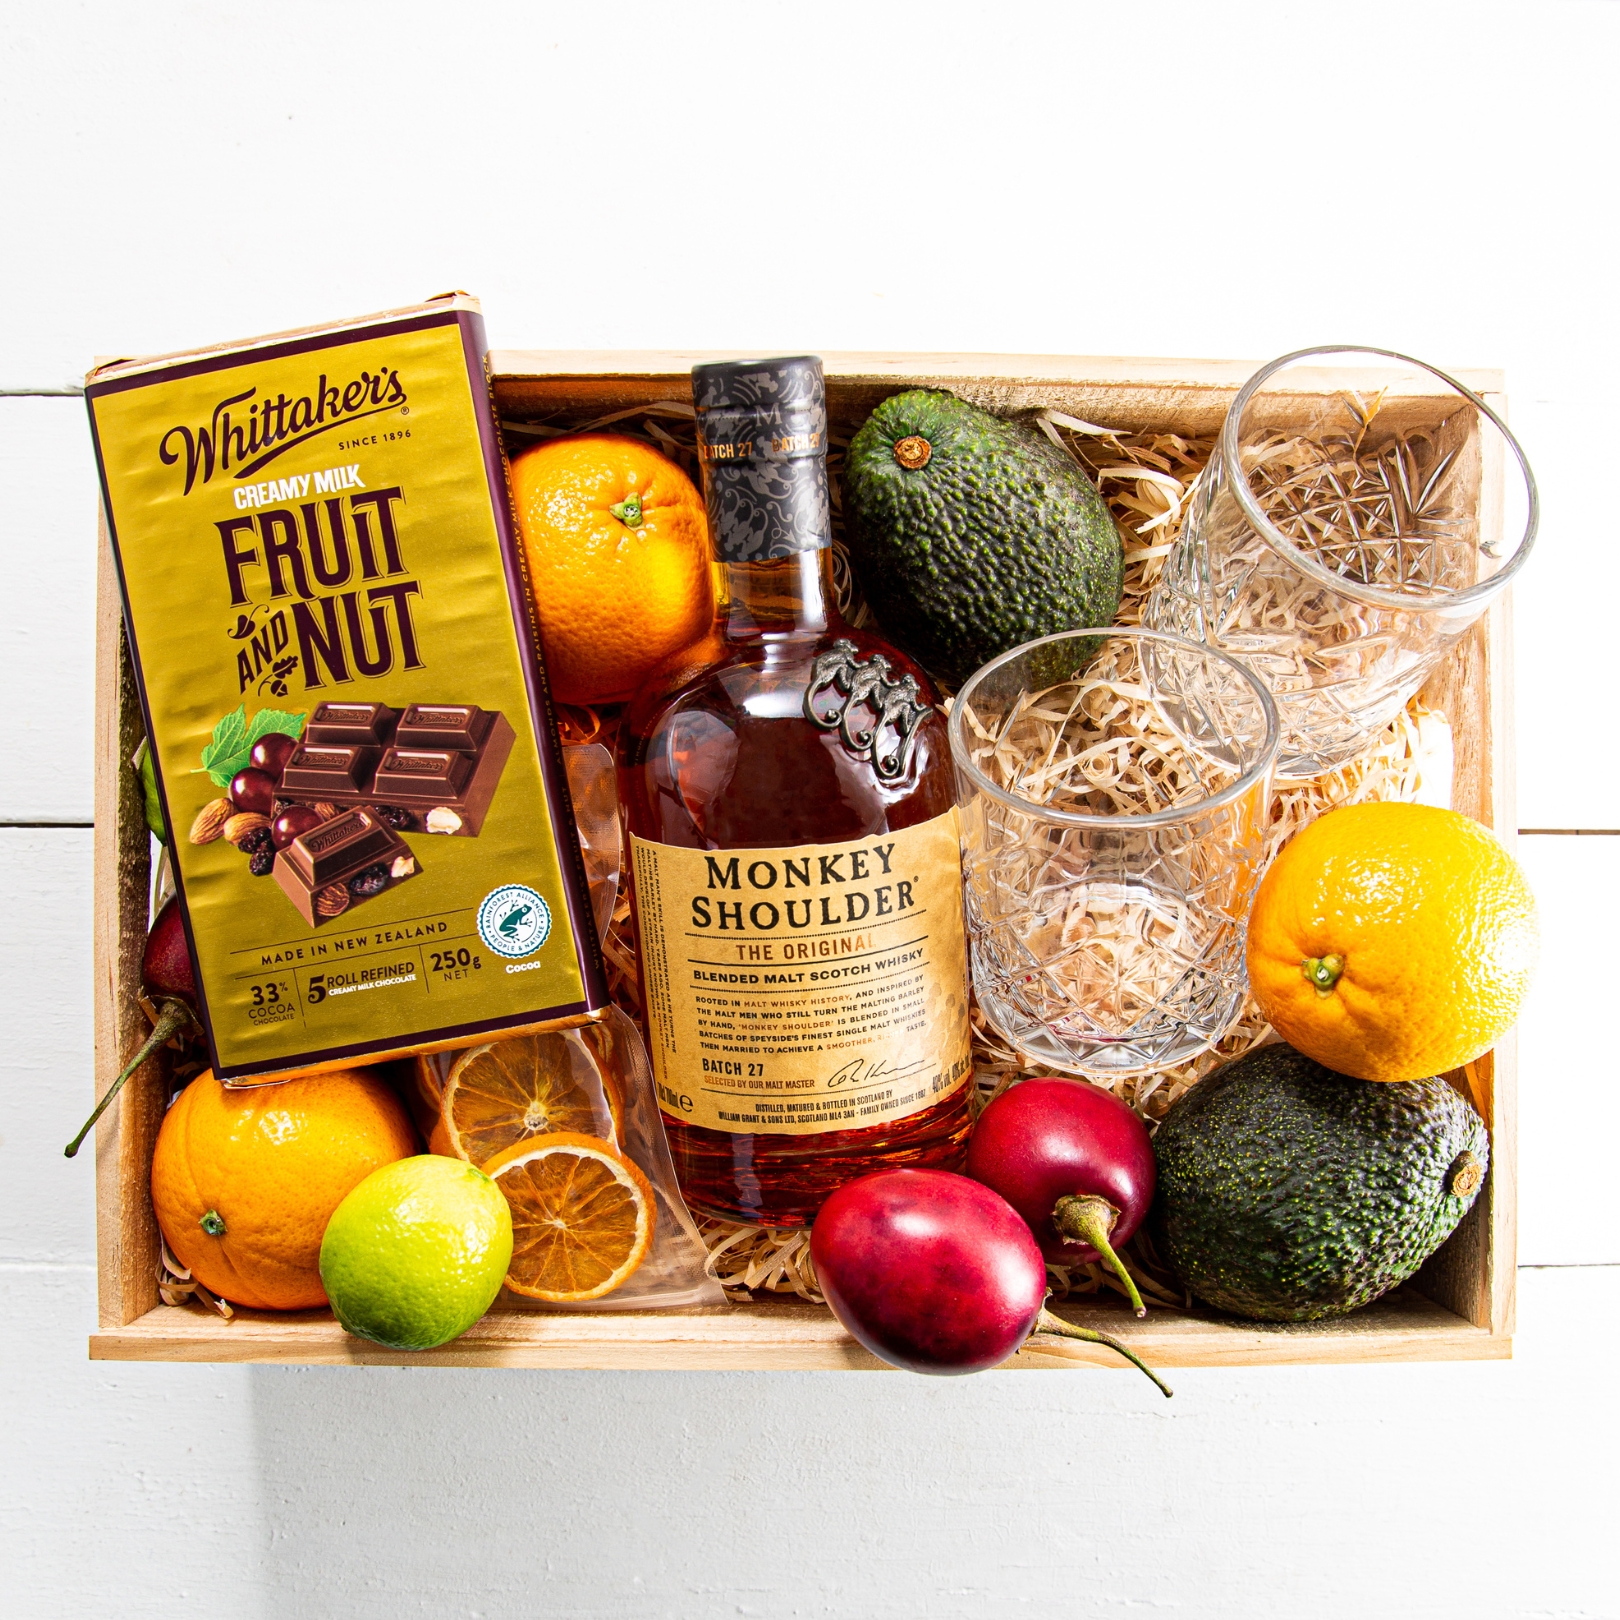 Buy The Whiskey Lover - Whiskey, Chocolate & Fruit Gift Box Online NZ - Twisted Citrus